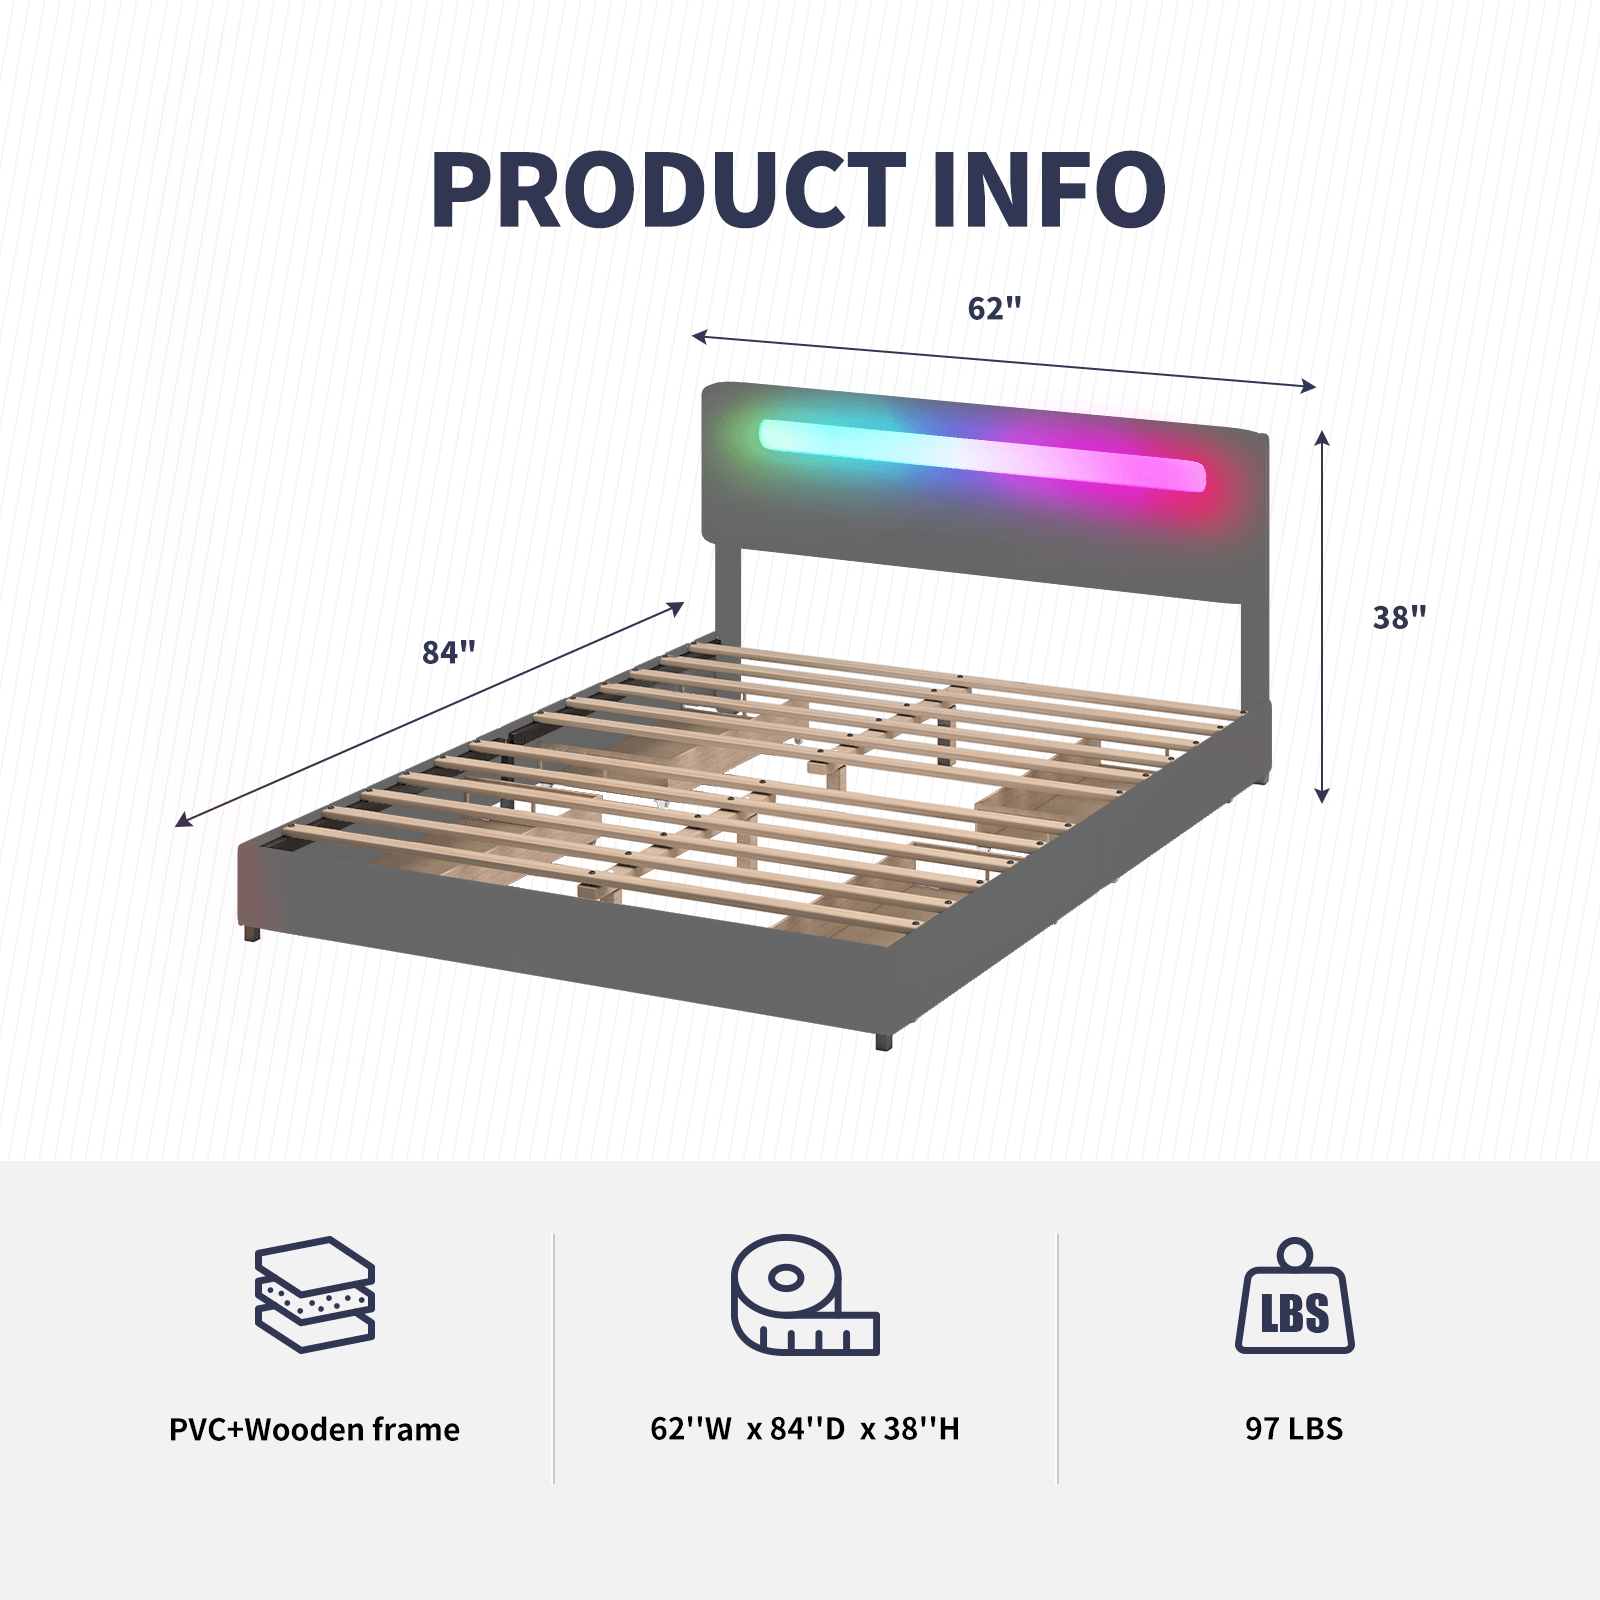 Drawer Bed | Adjustable RGB LED Lighting Effects Headboard With Wood Slat Support and 4 Storage Drawers - Mjkonebed